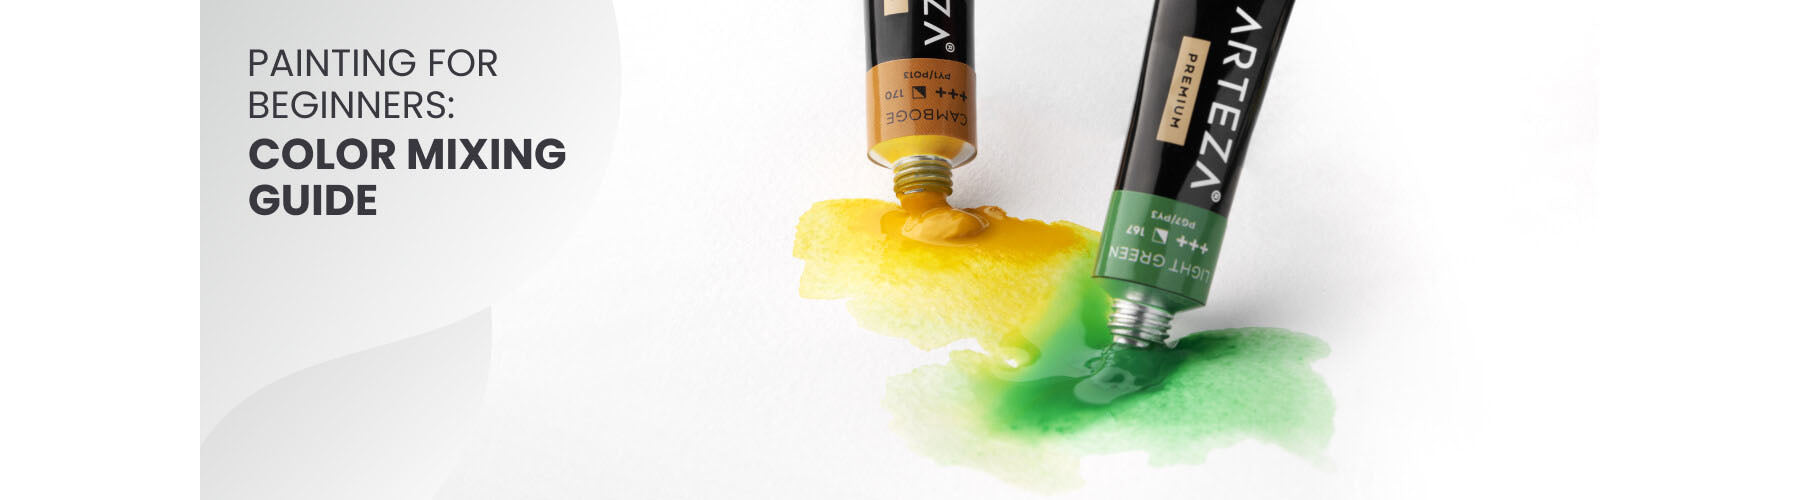 How To Make Kelly Green Paint Color - What Color Mixing To Make Kelly Green  